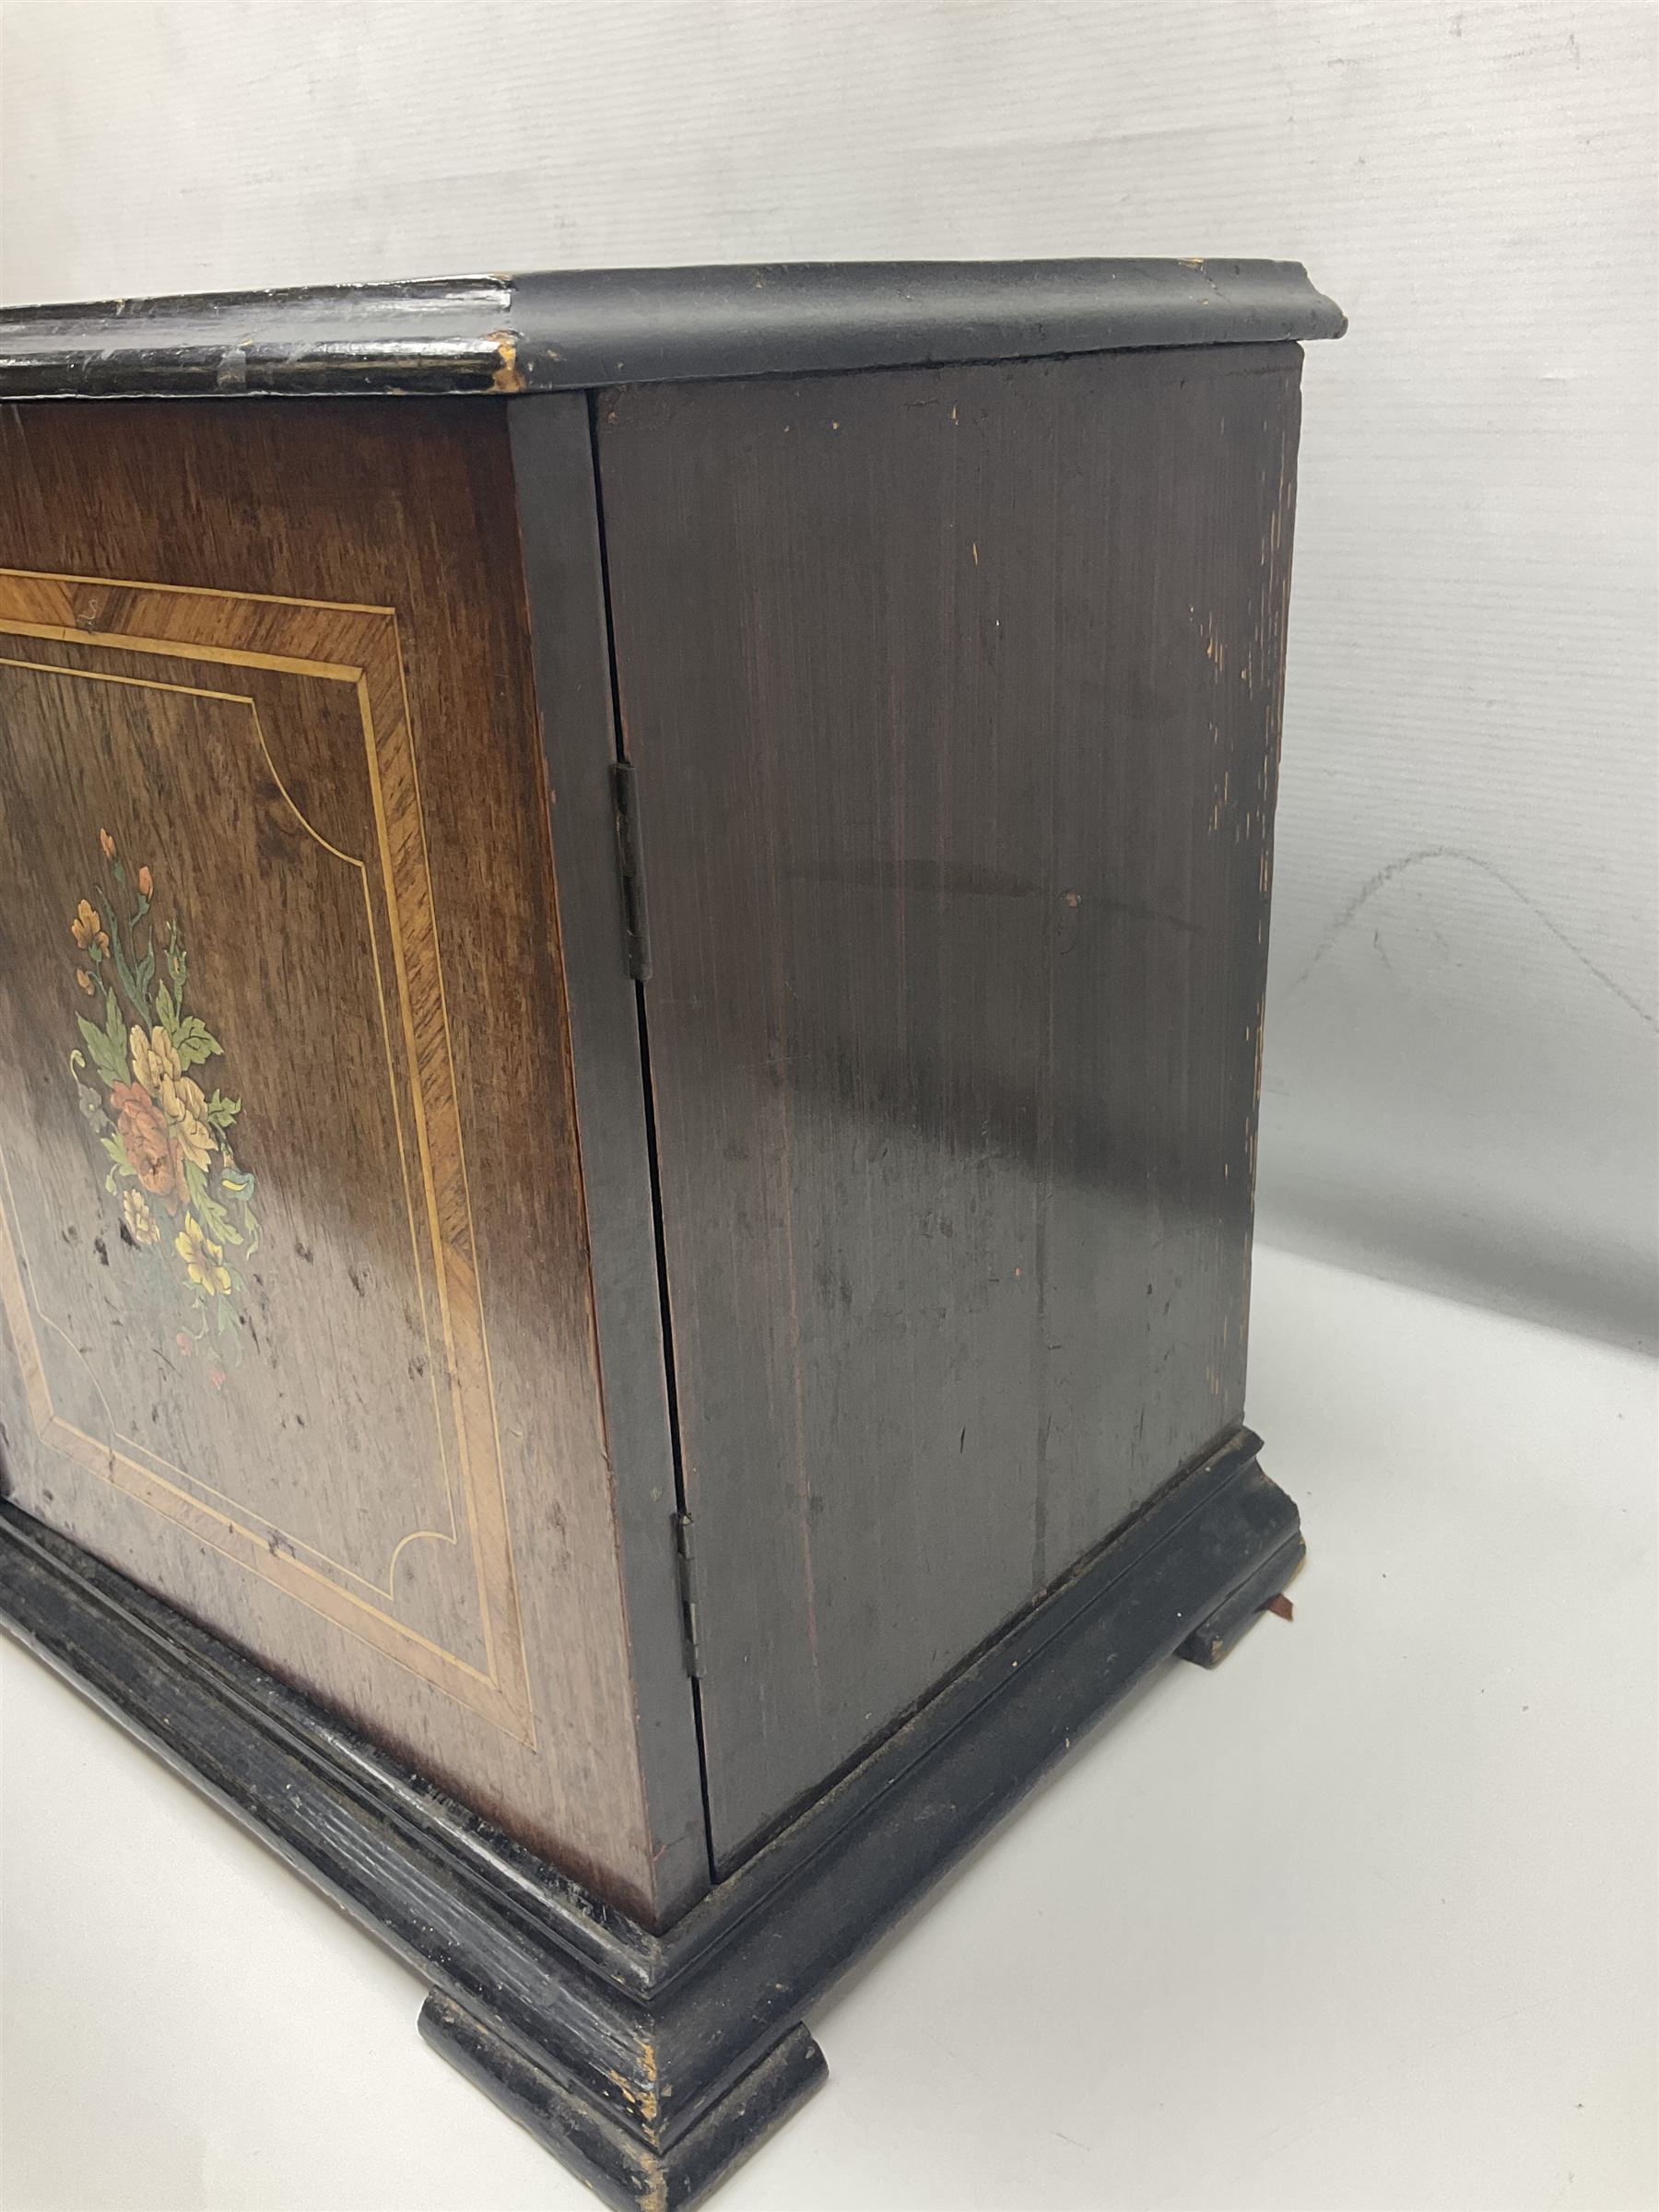 Swiss - 19th-century cylinder music box in a mahogany "buffet" style case with inlaid door panels - Image 13 of 13